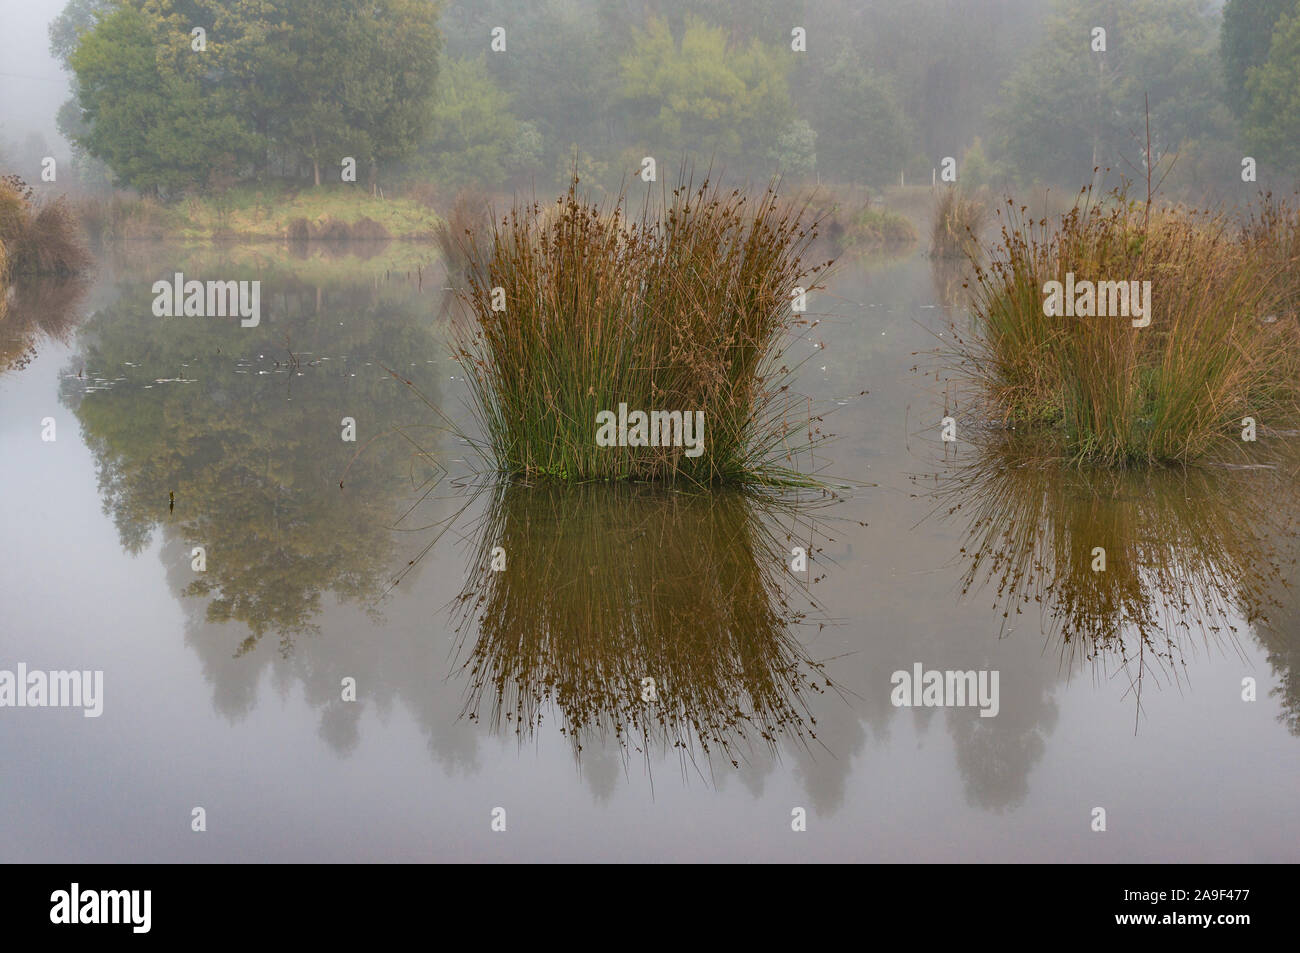 Tussock reflected in mirror-like smooth water of forest lake, swamp Stock Photo